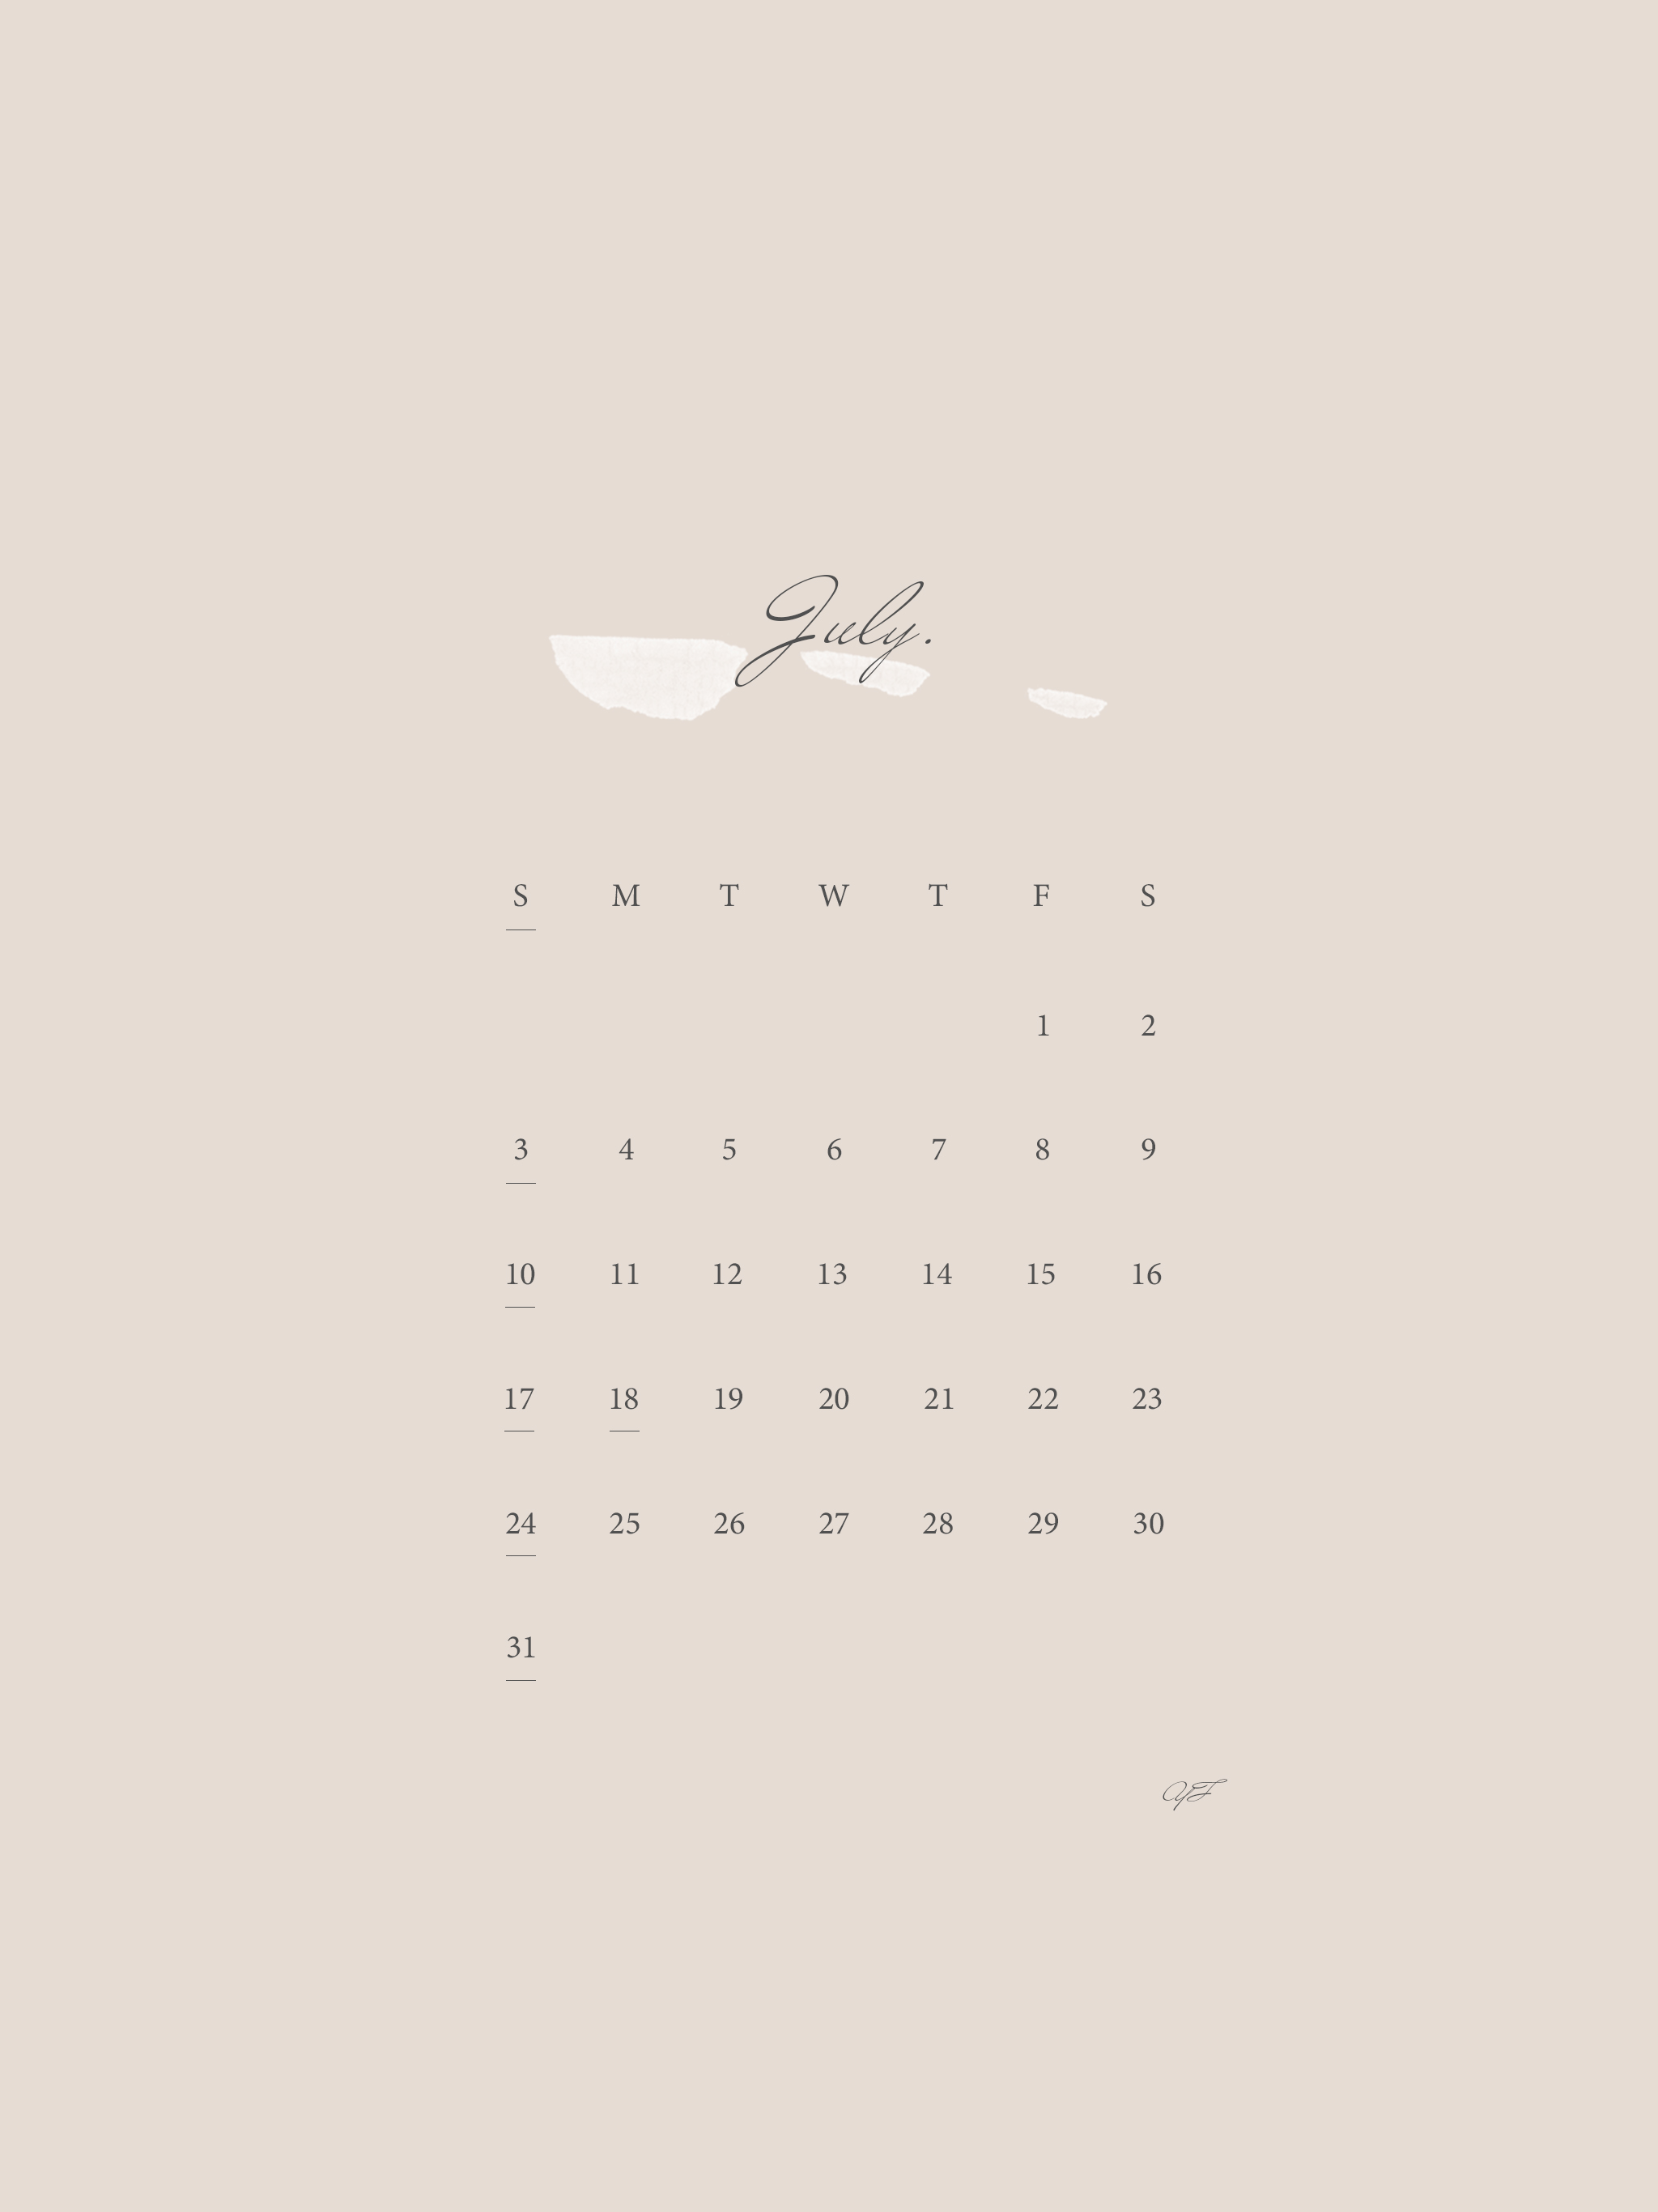 July 22 Calendar Wallpaper For The Ipad Design By Yf